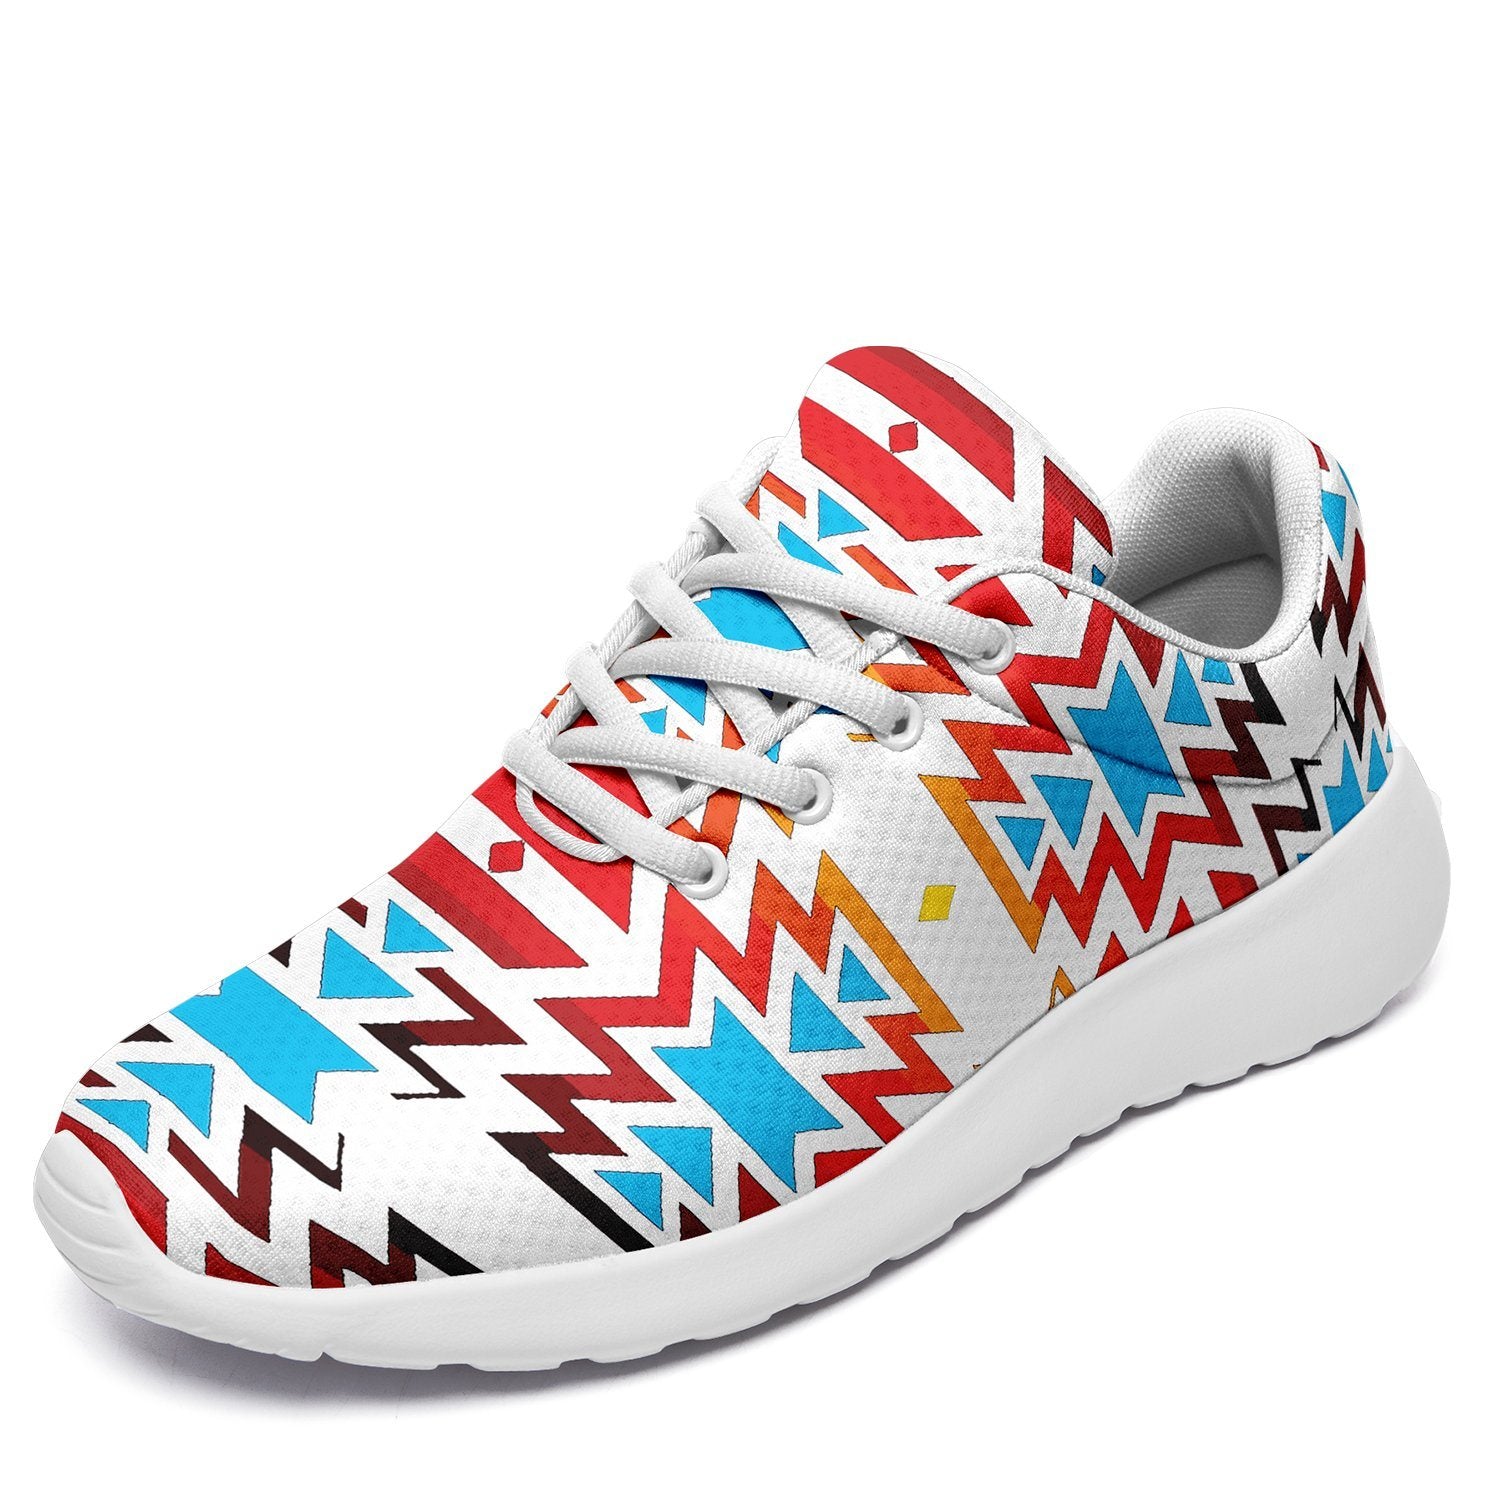 Fire Colors and Sky Ikkaayi Sport Sneakers 49 Dzine US Women 4.5 / US Youth 3.5 / EUR 35 White Sole 